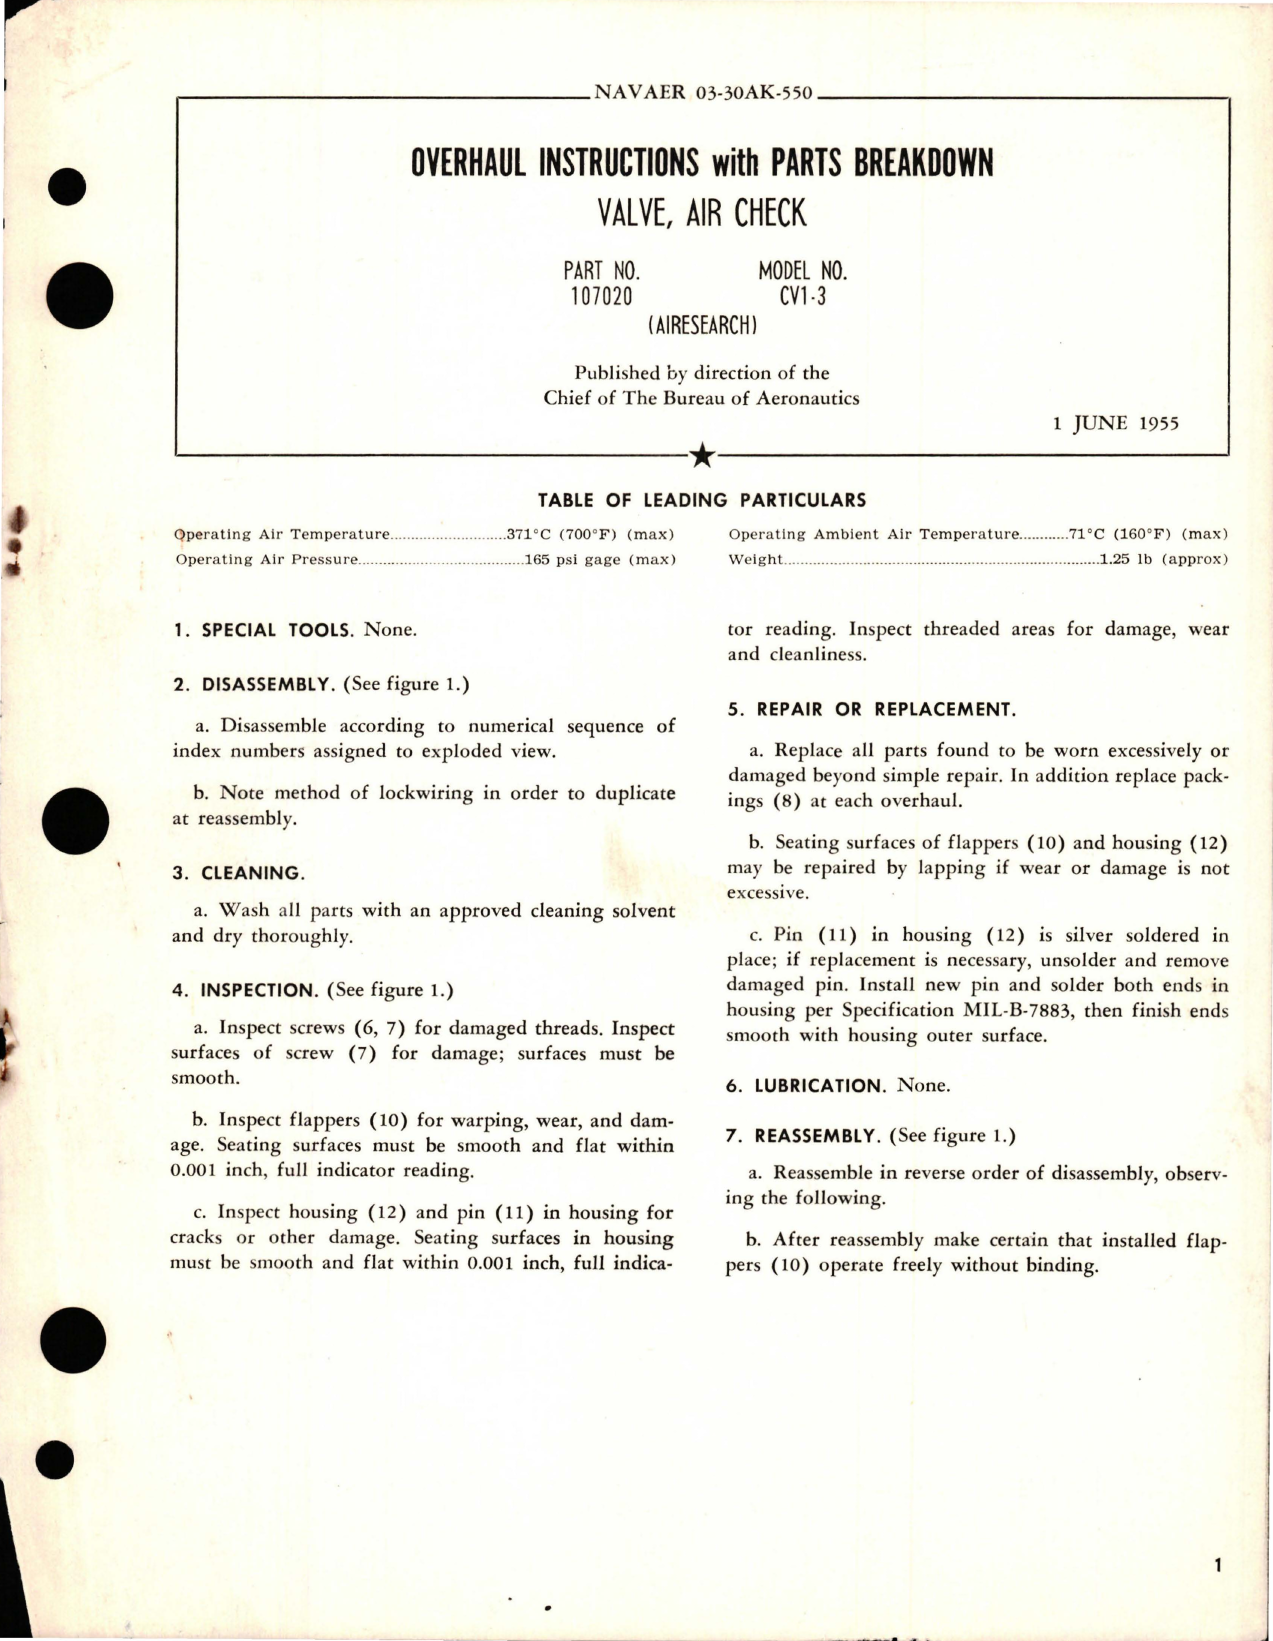 Sample page 1 from AirCorps Library document: Overhaul Instructions with Parts Breakdown for Air Check Valve - Part 107020 - Model CV1-3